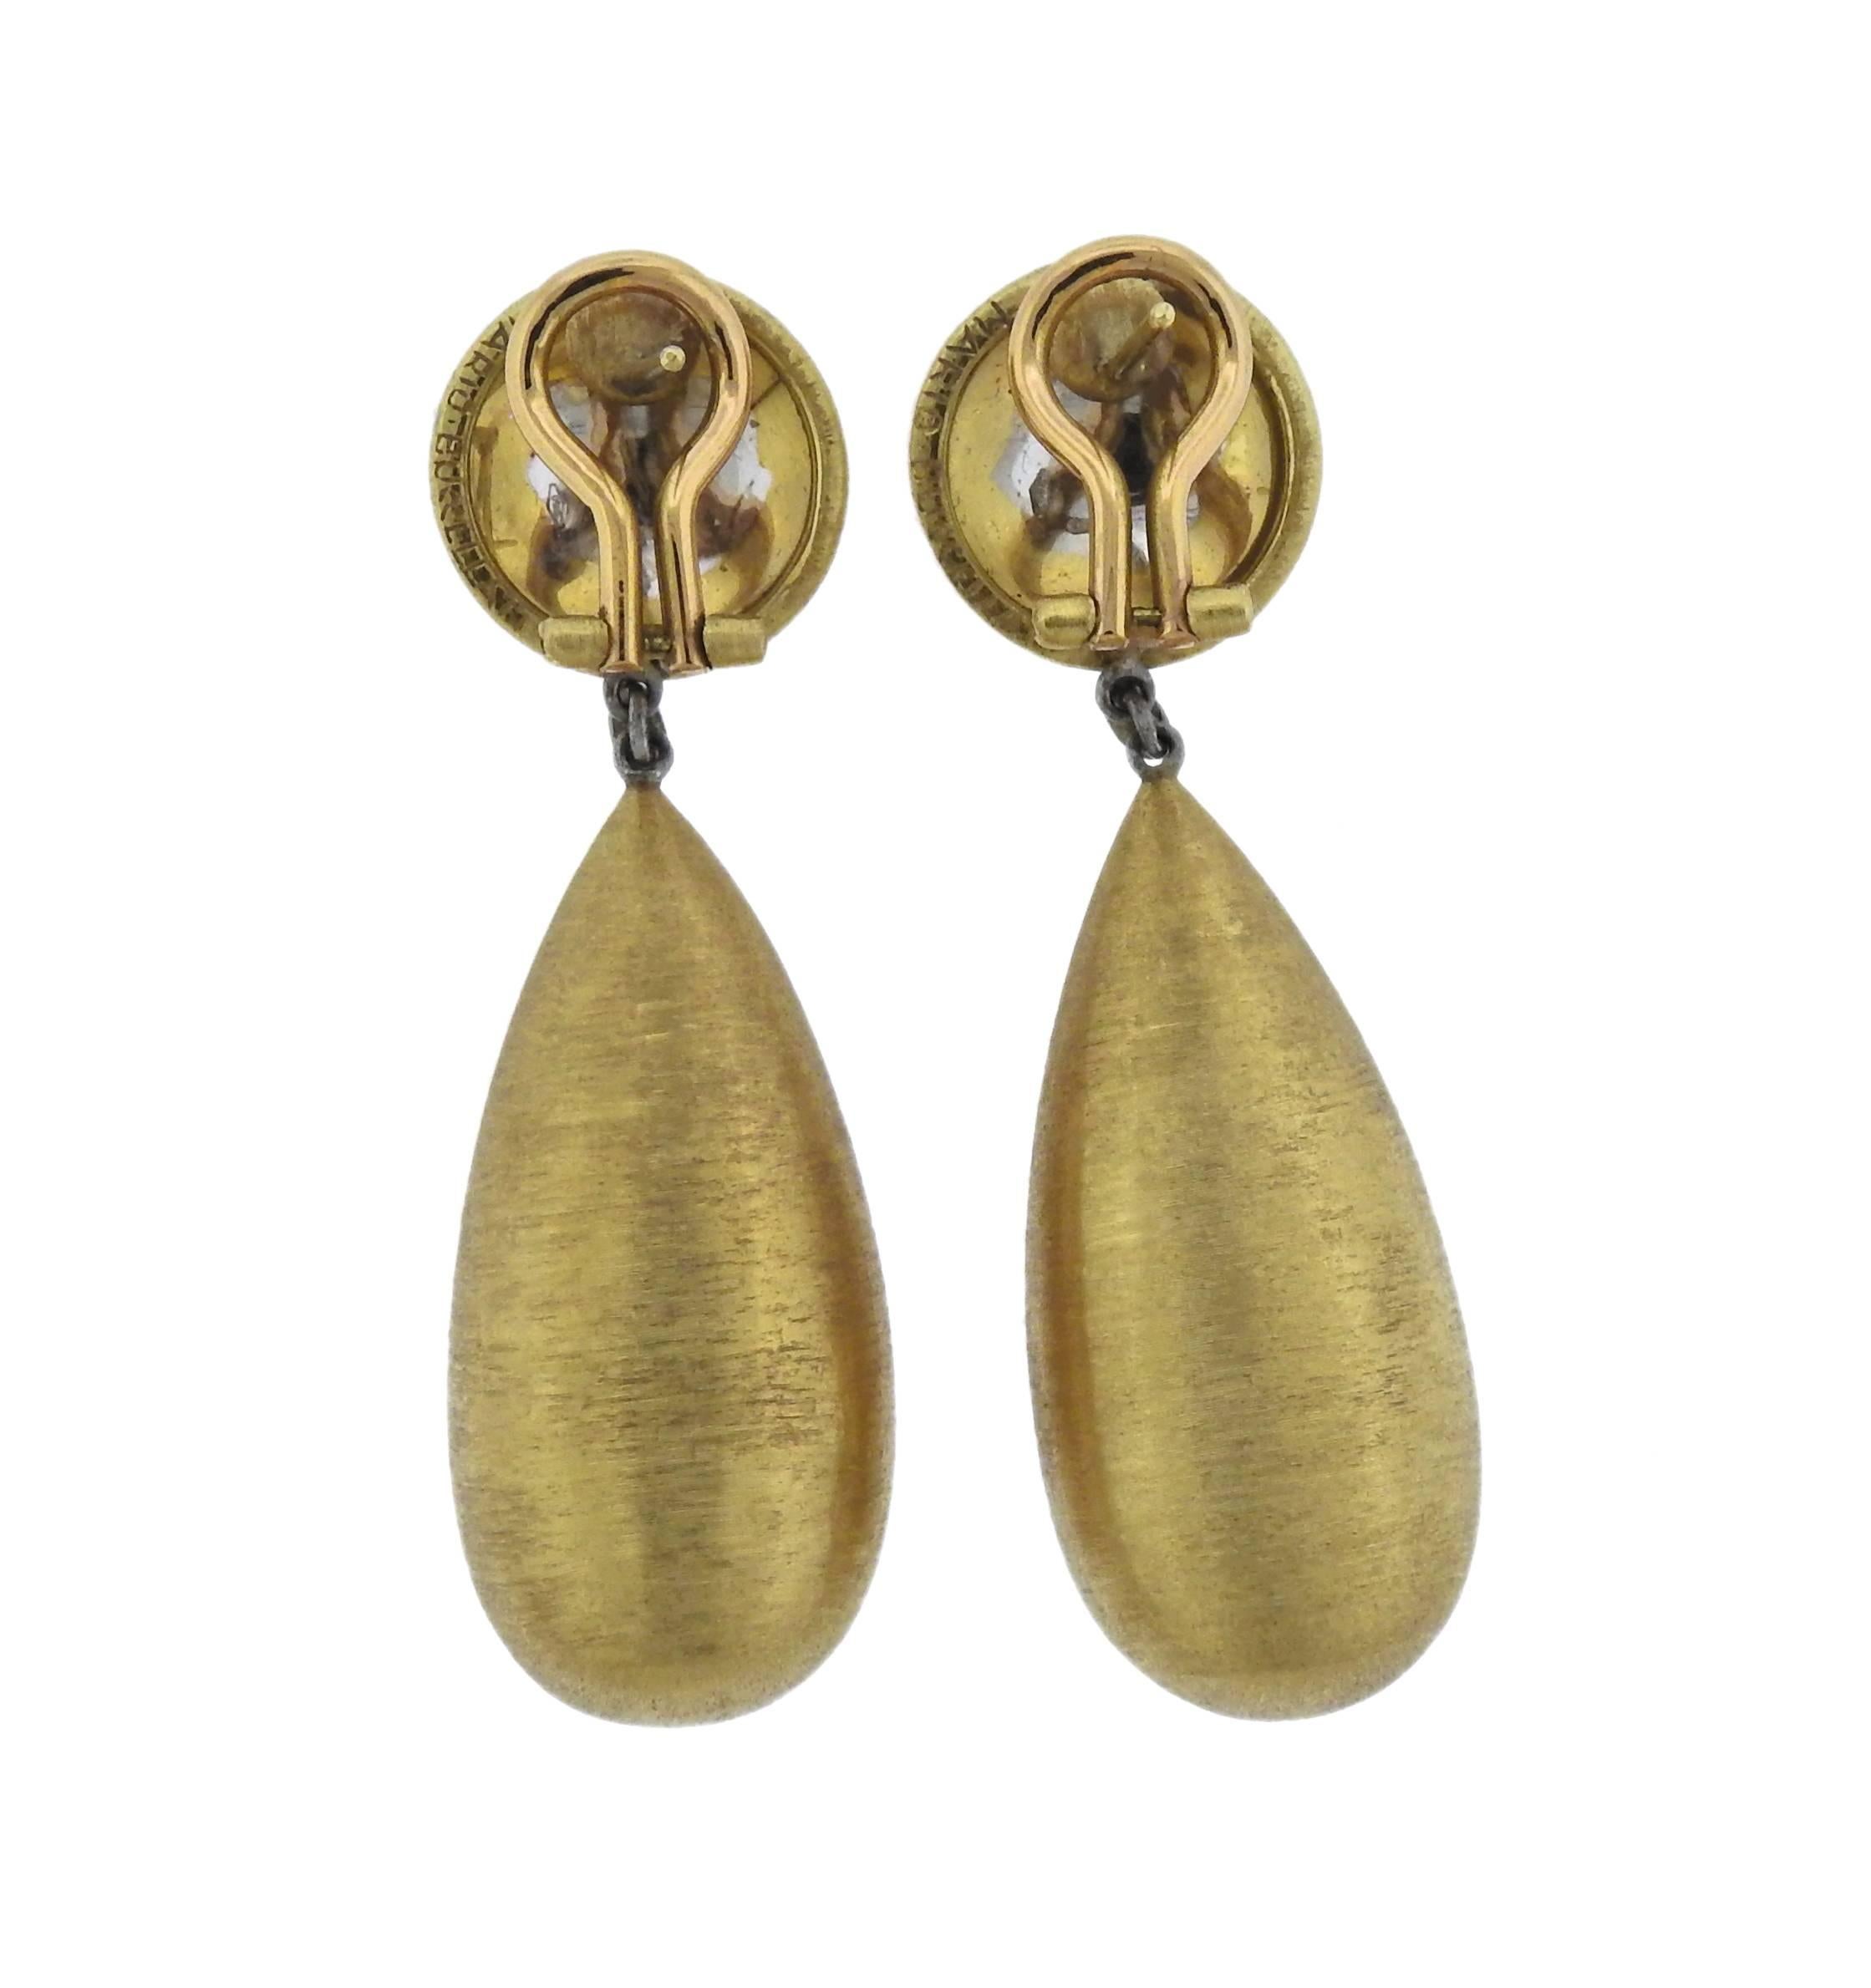 18k gold teardrop earrings crafted by Buccellati for the Geminato collection. Earrings measure 53mm x 18mm, weigh 26 grams. Marked Mario Buccellati.  Come with Buccellati box. 